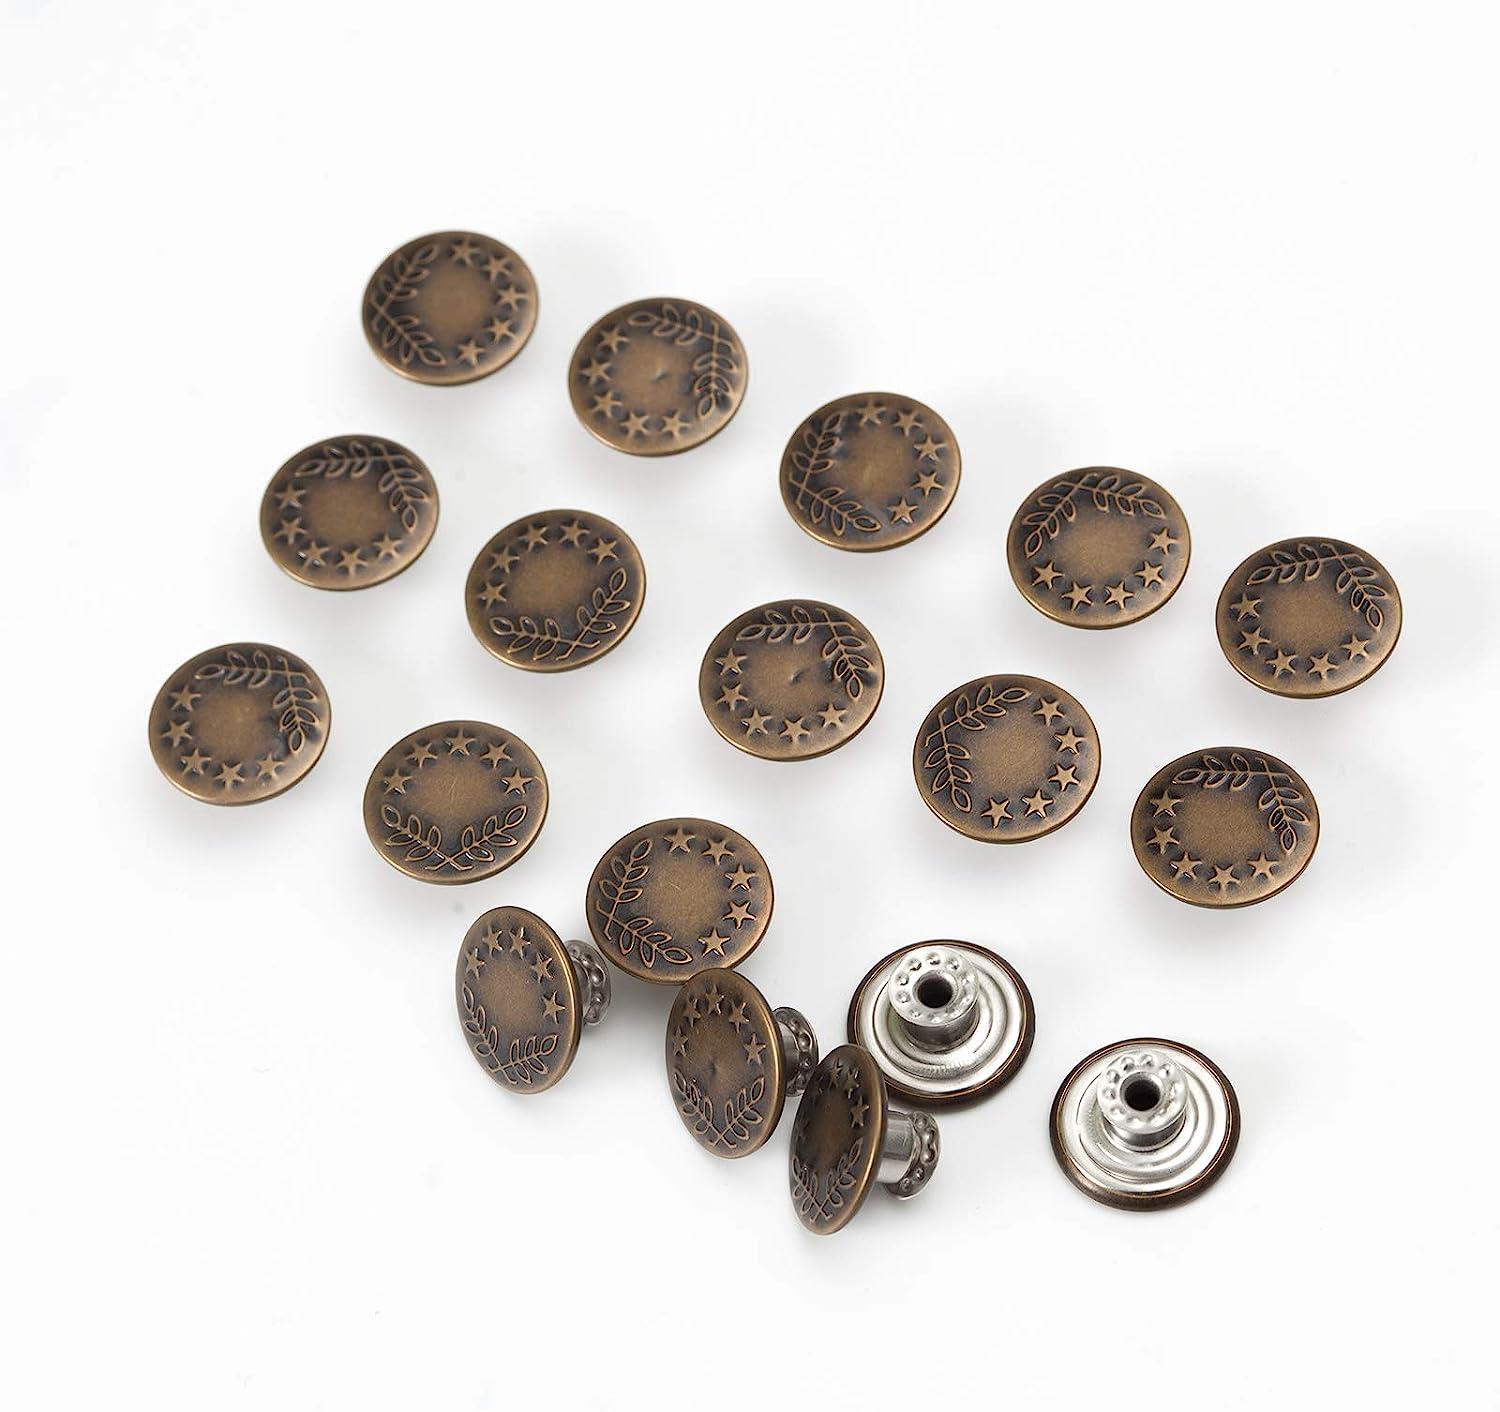 14 mm Hammer On Denim Jeans Buttons brass based with tack alloy studs, AH1